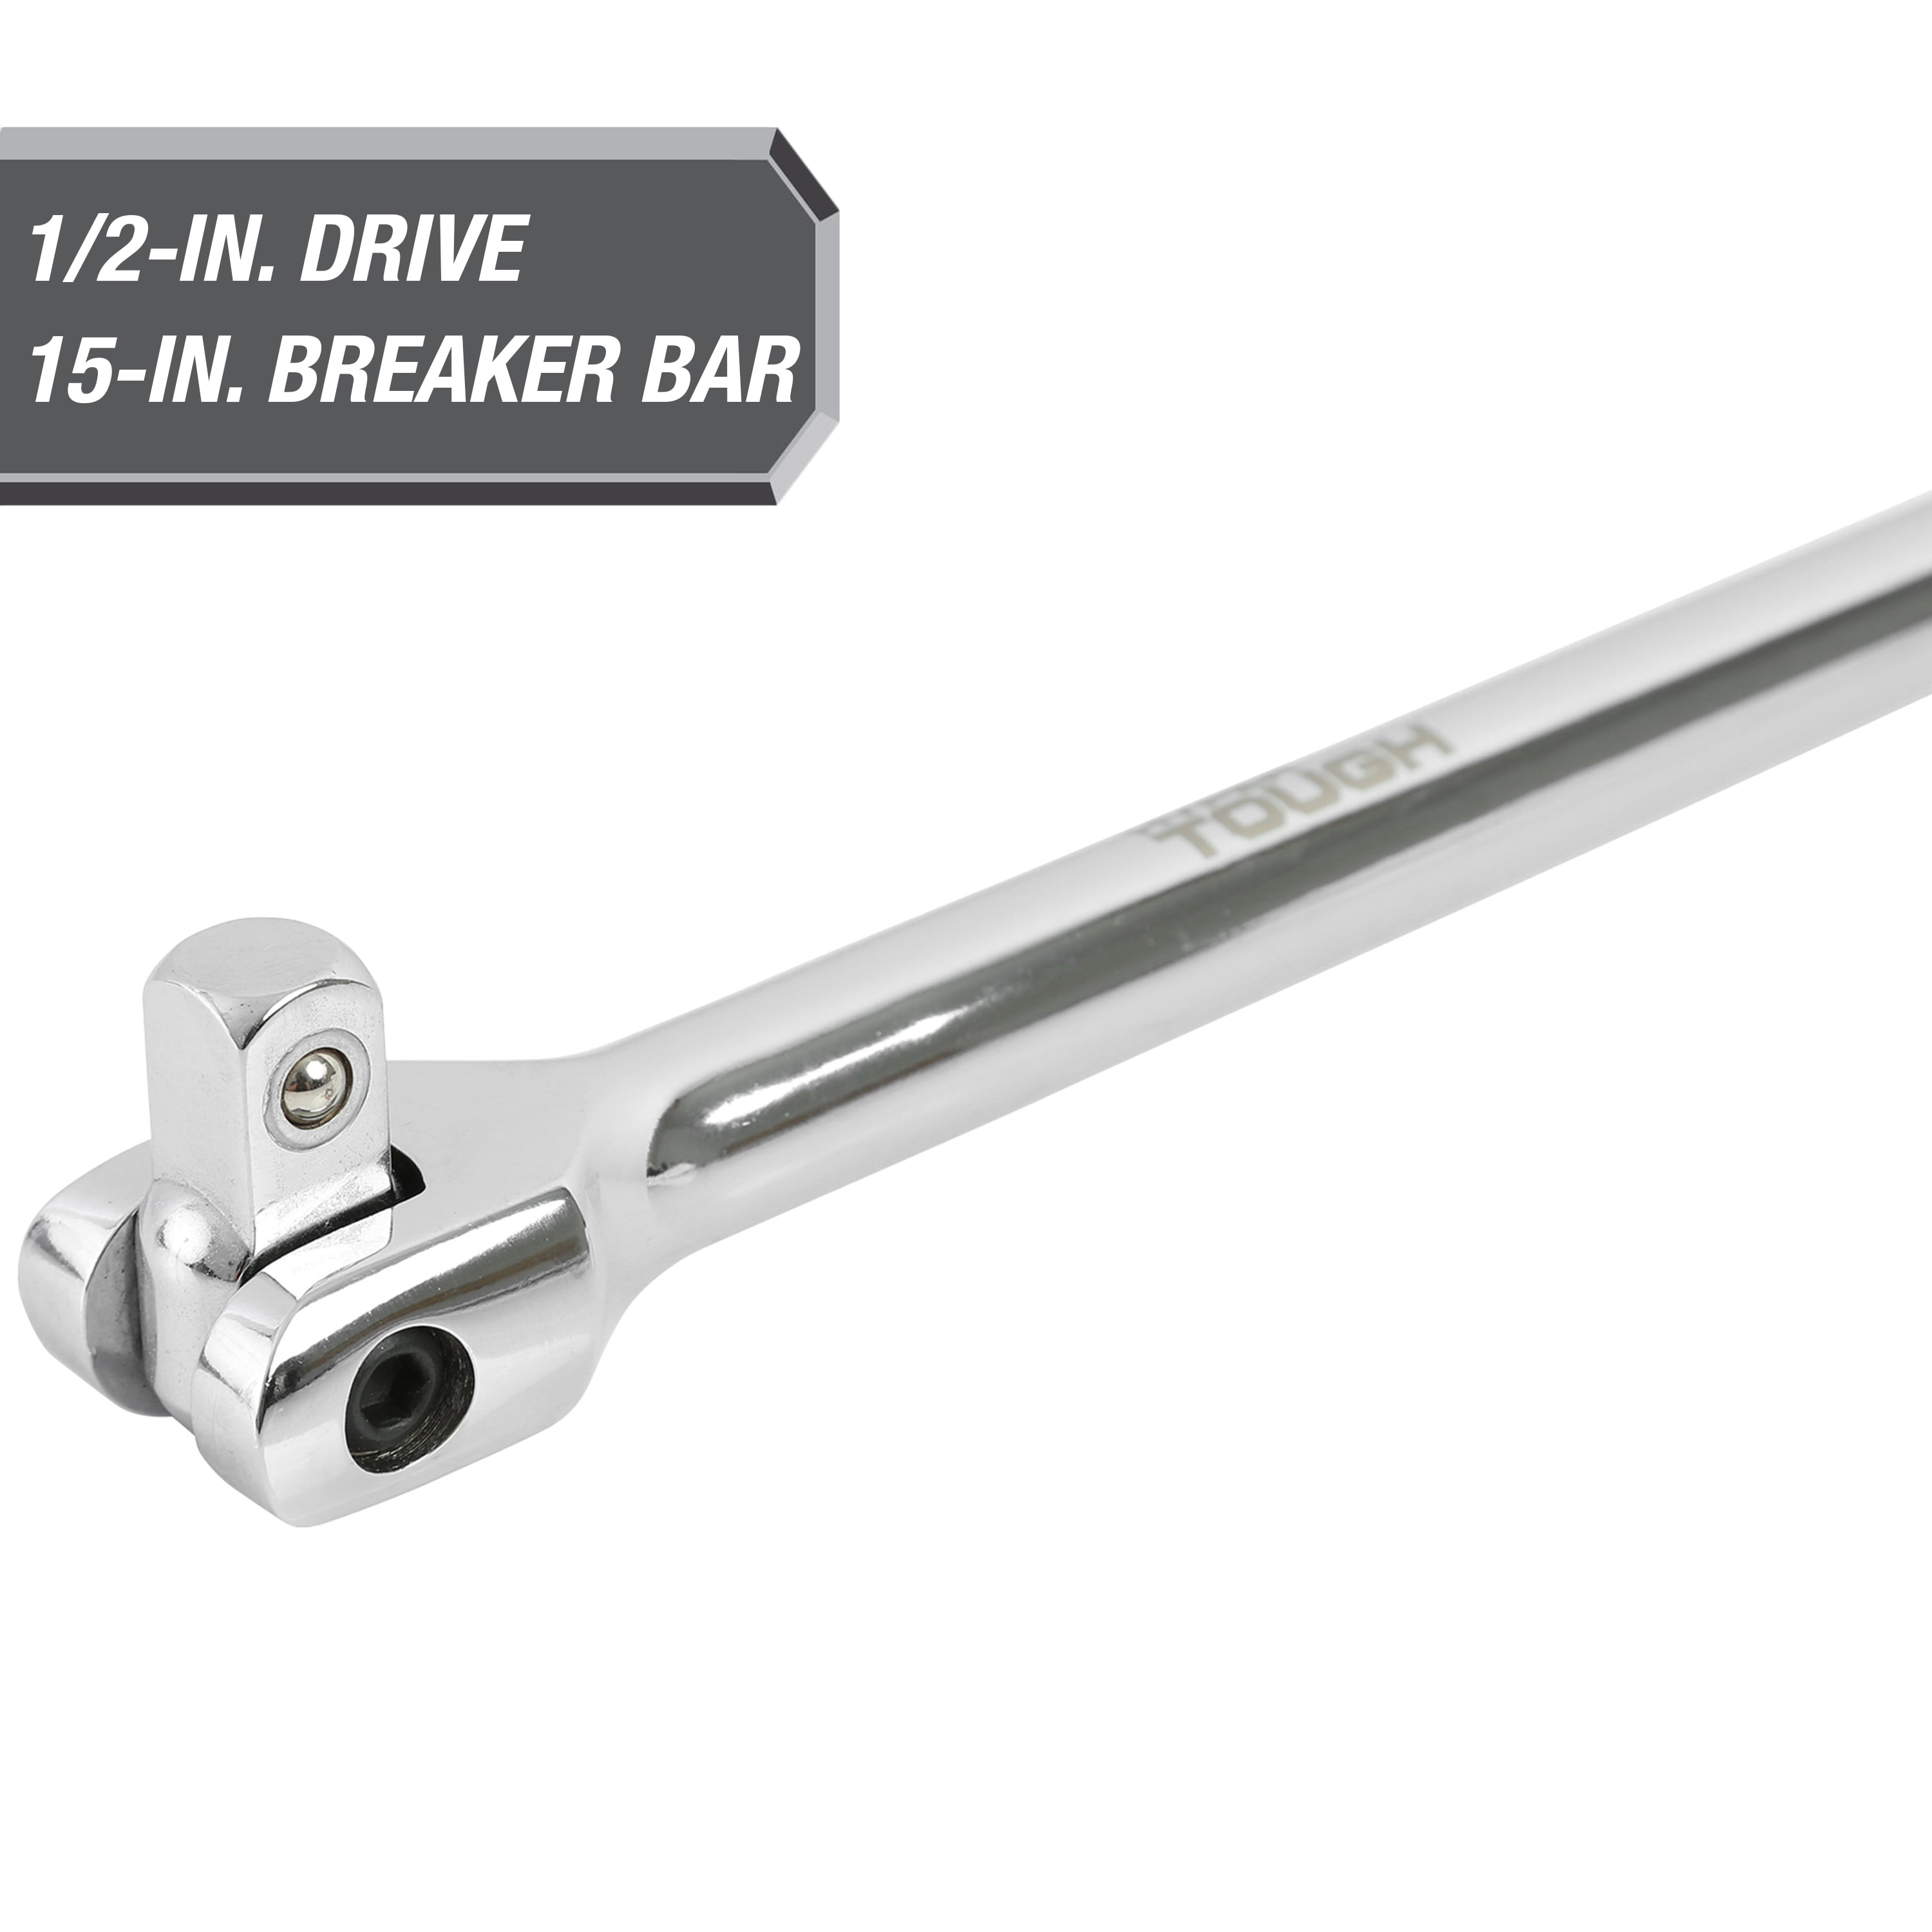 1/2” Drive x 18” Inch 180-Degree Rotating Head and Spring-Loaded Ball Bearing 1/2 Breaker Bar ABN Extension Bar 